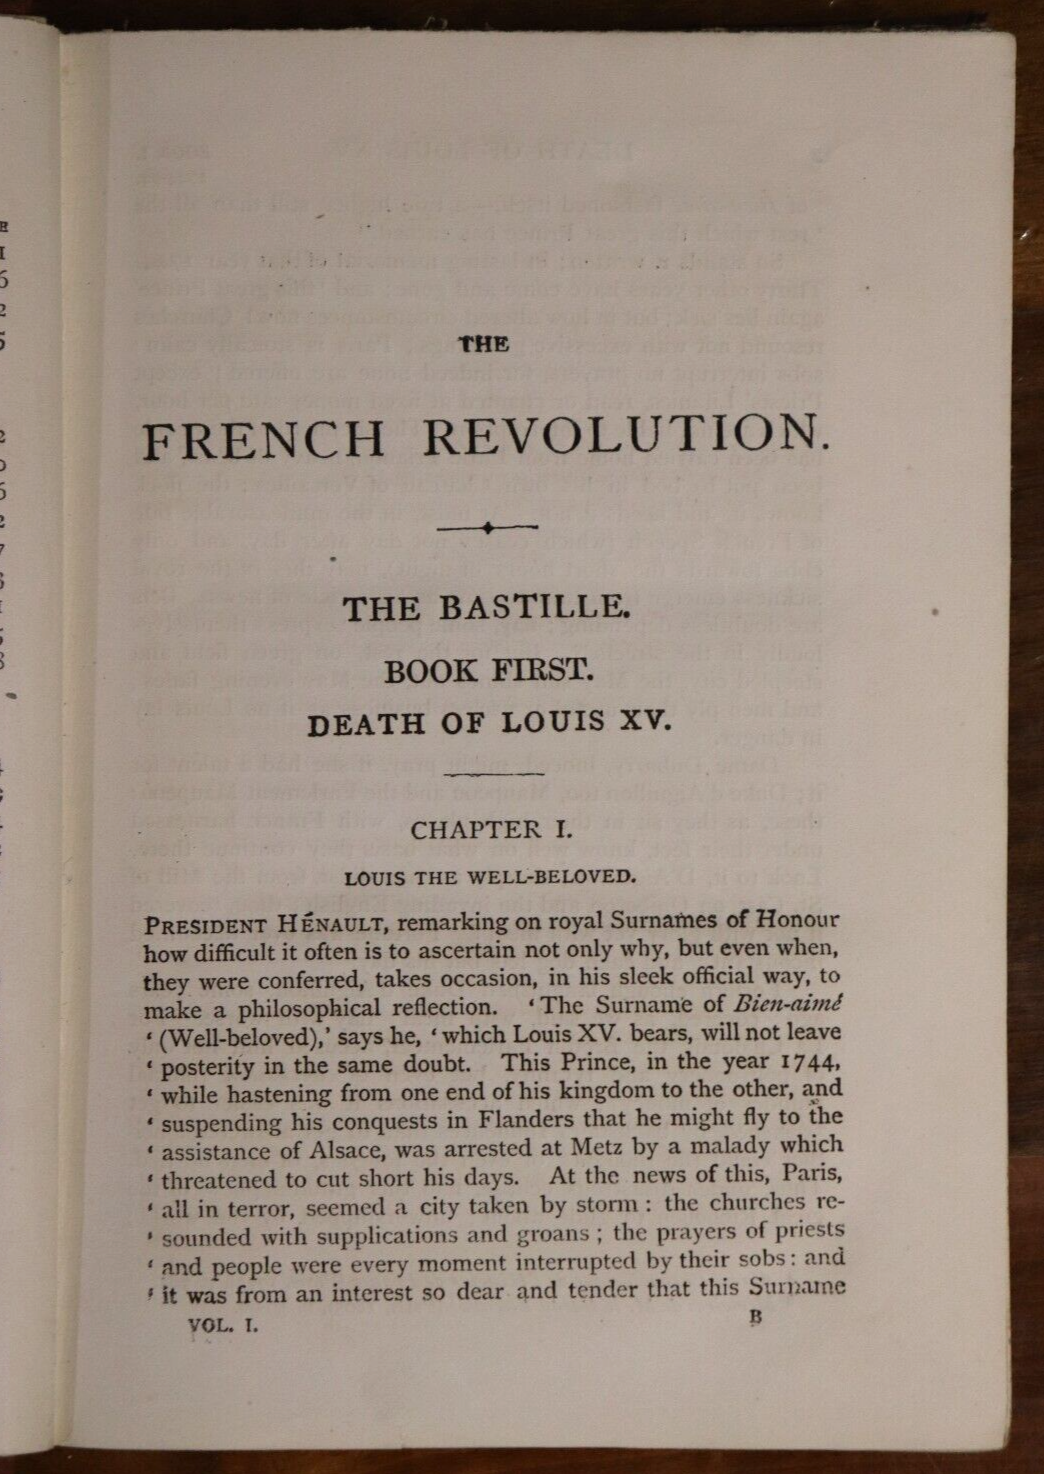 c1870 3vol The French Revolution: A History by Thomas Carlyle Antiquarian Books